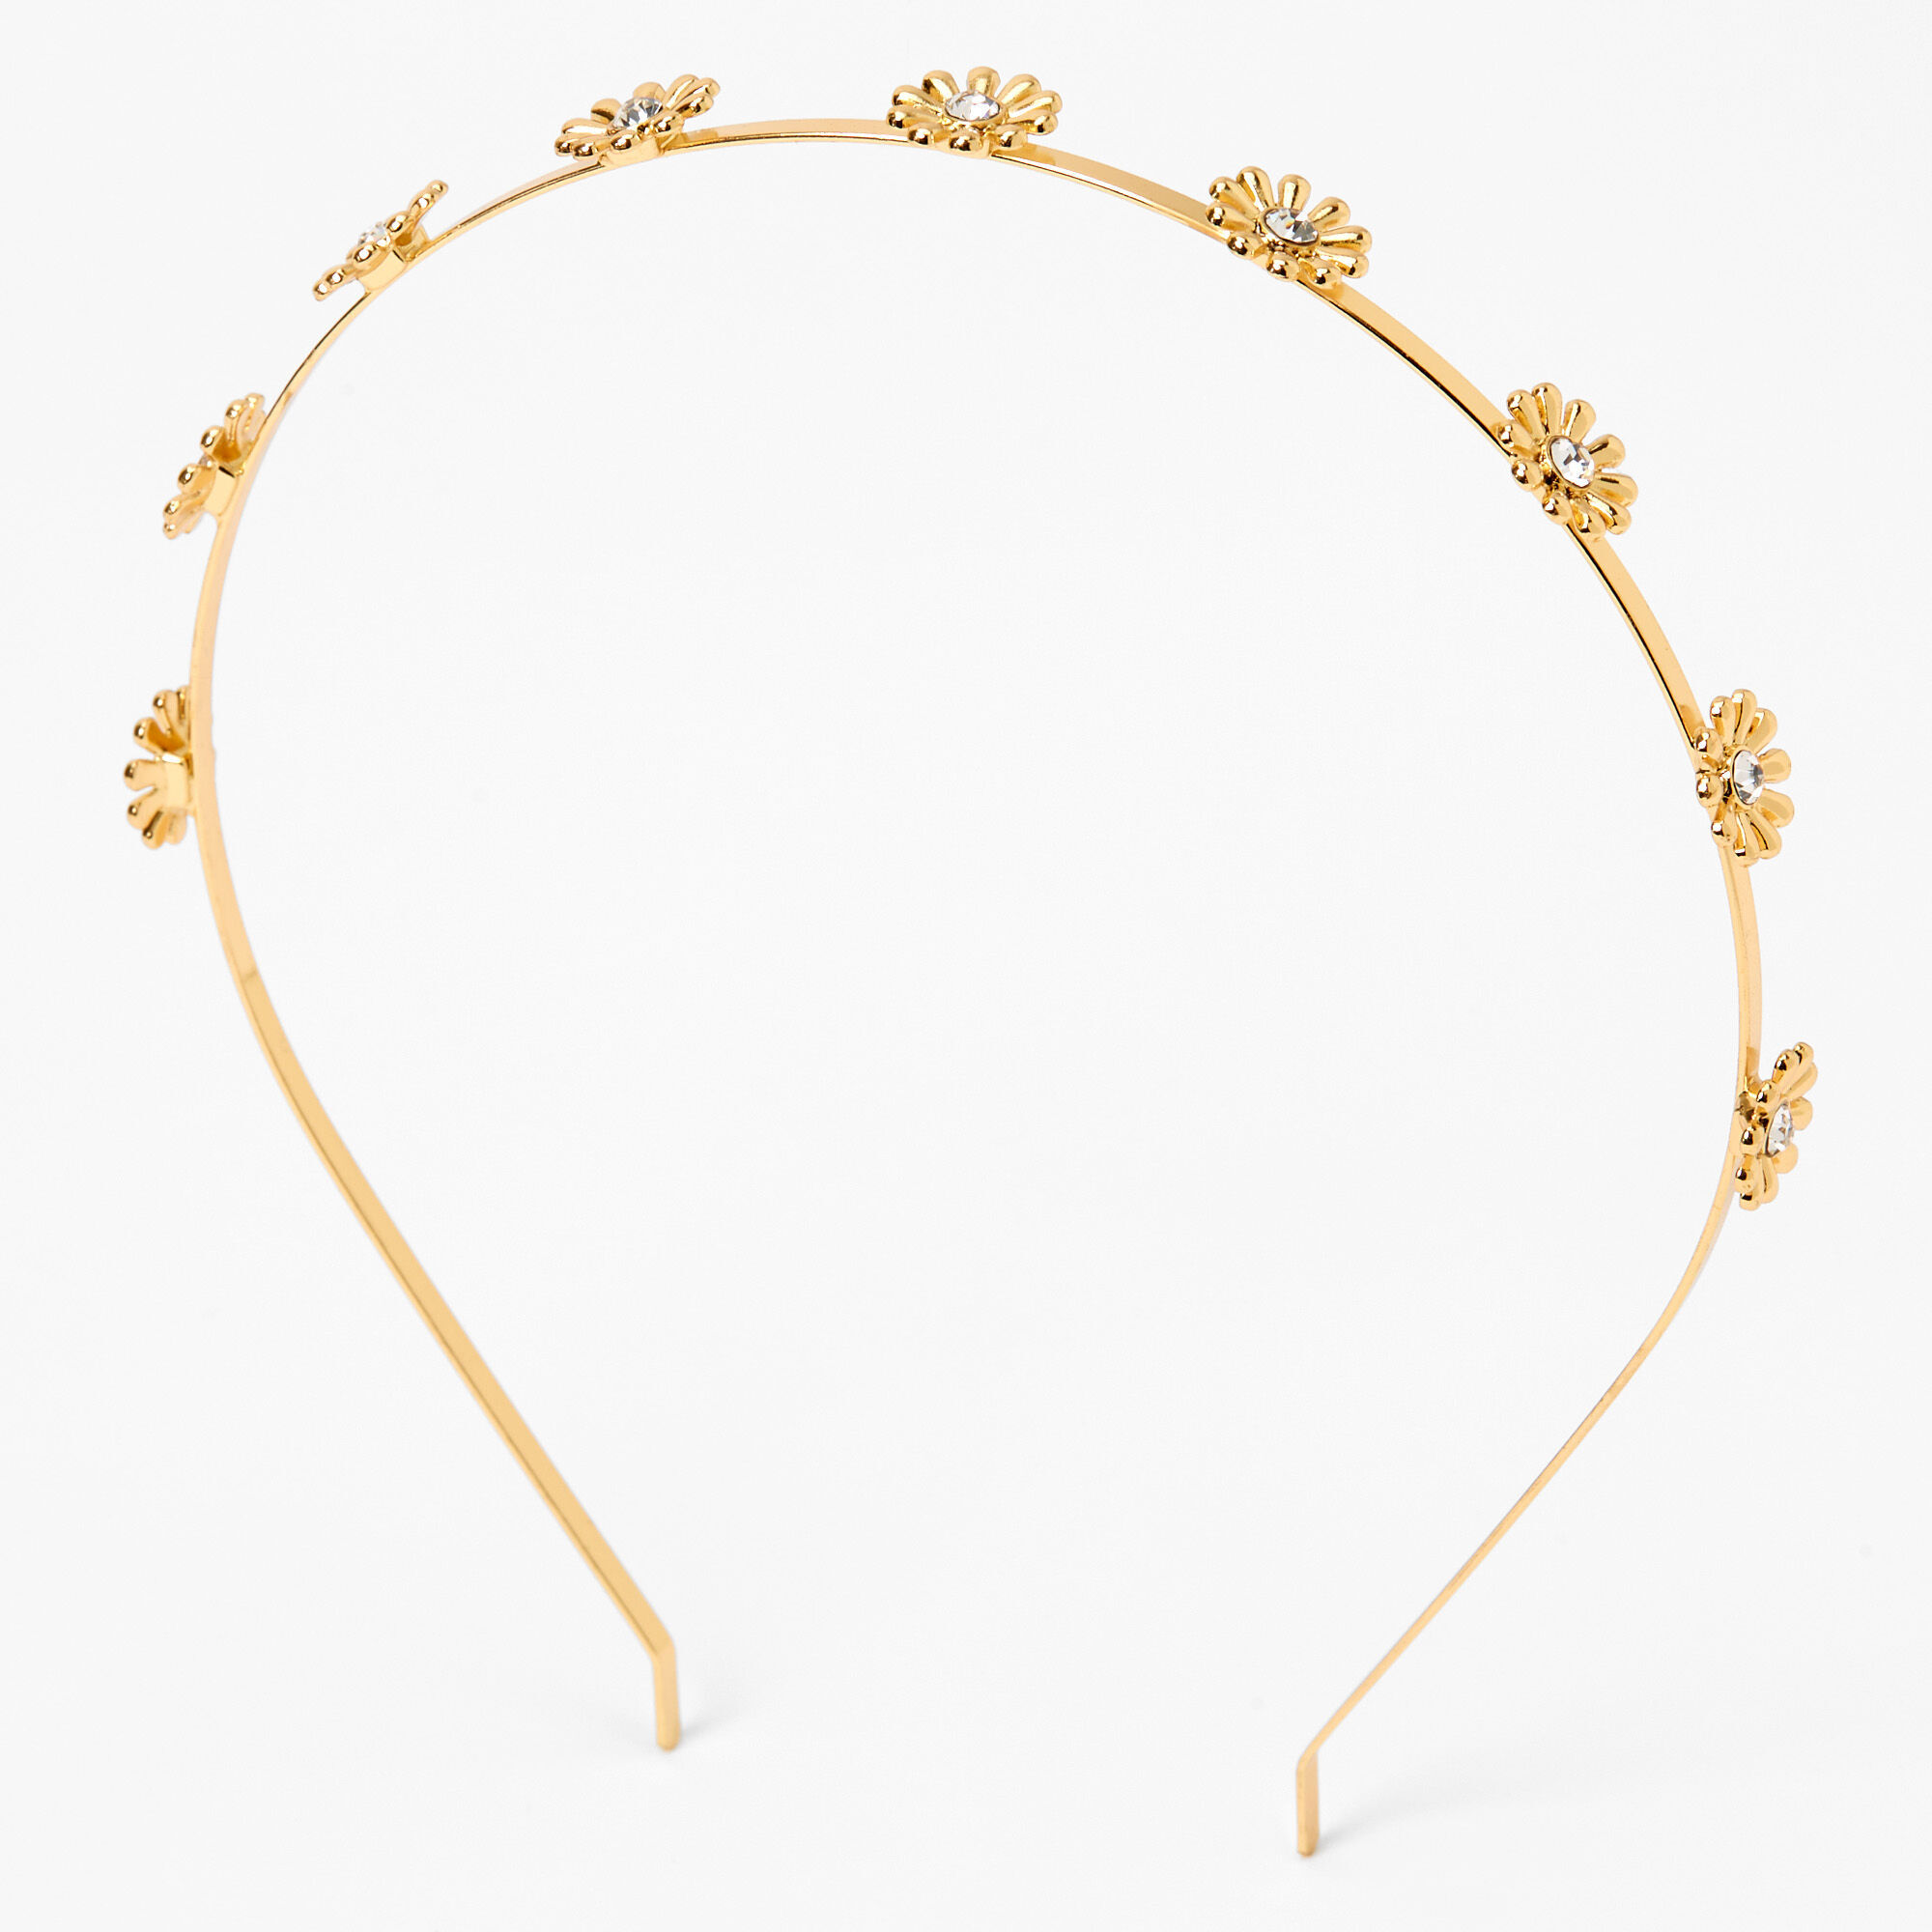 View Claires Tone Crystal Daisy Headband Gold information